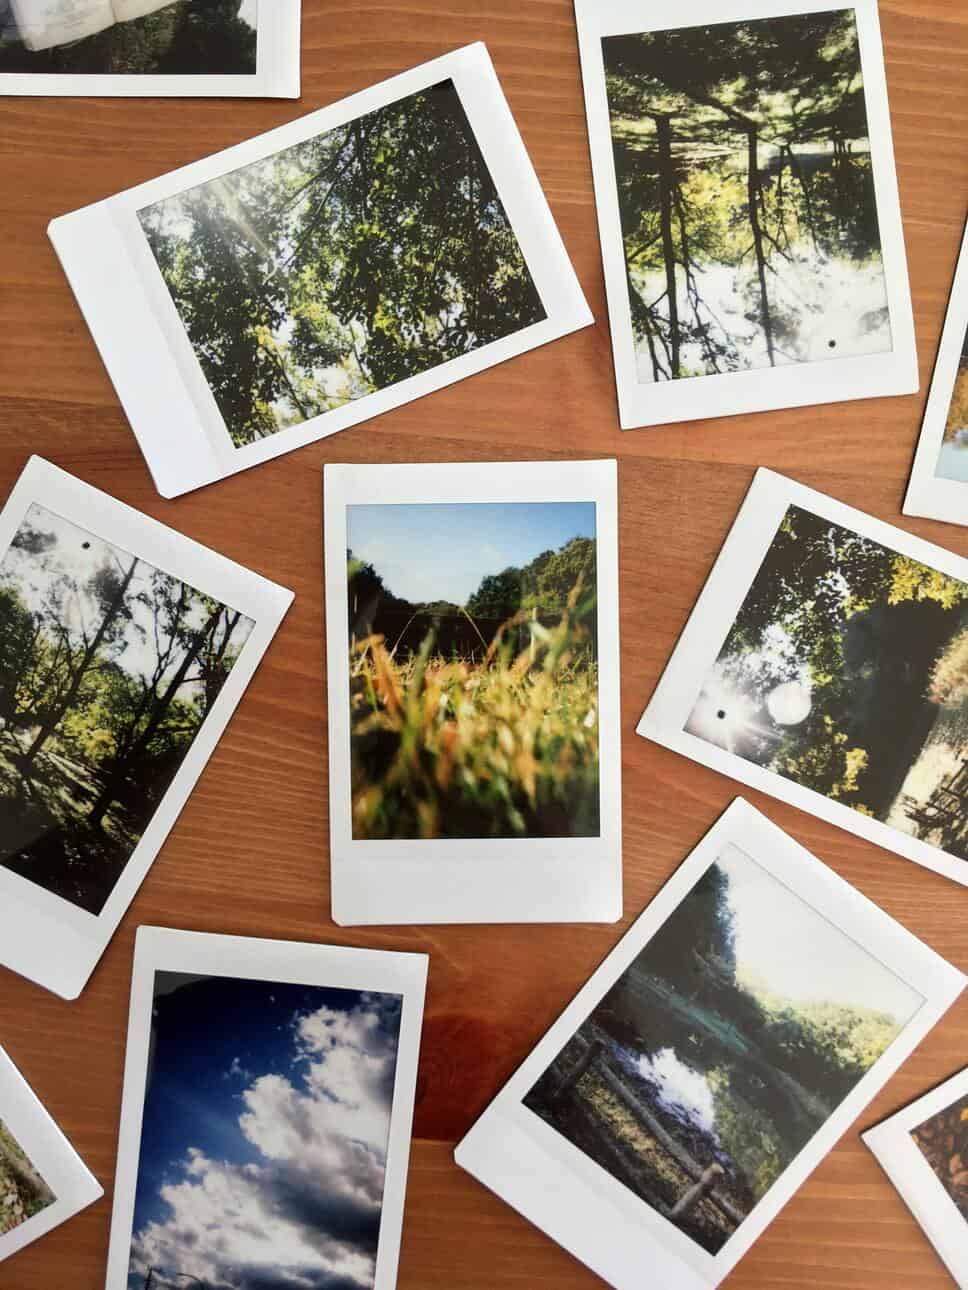 polaroid photos of nature on brown wooden table